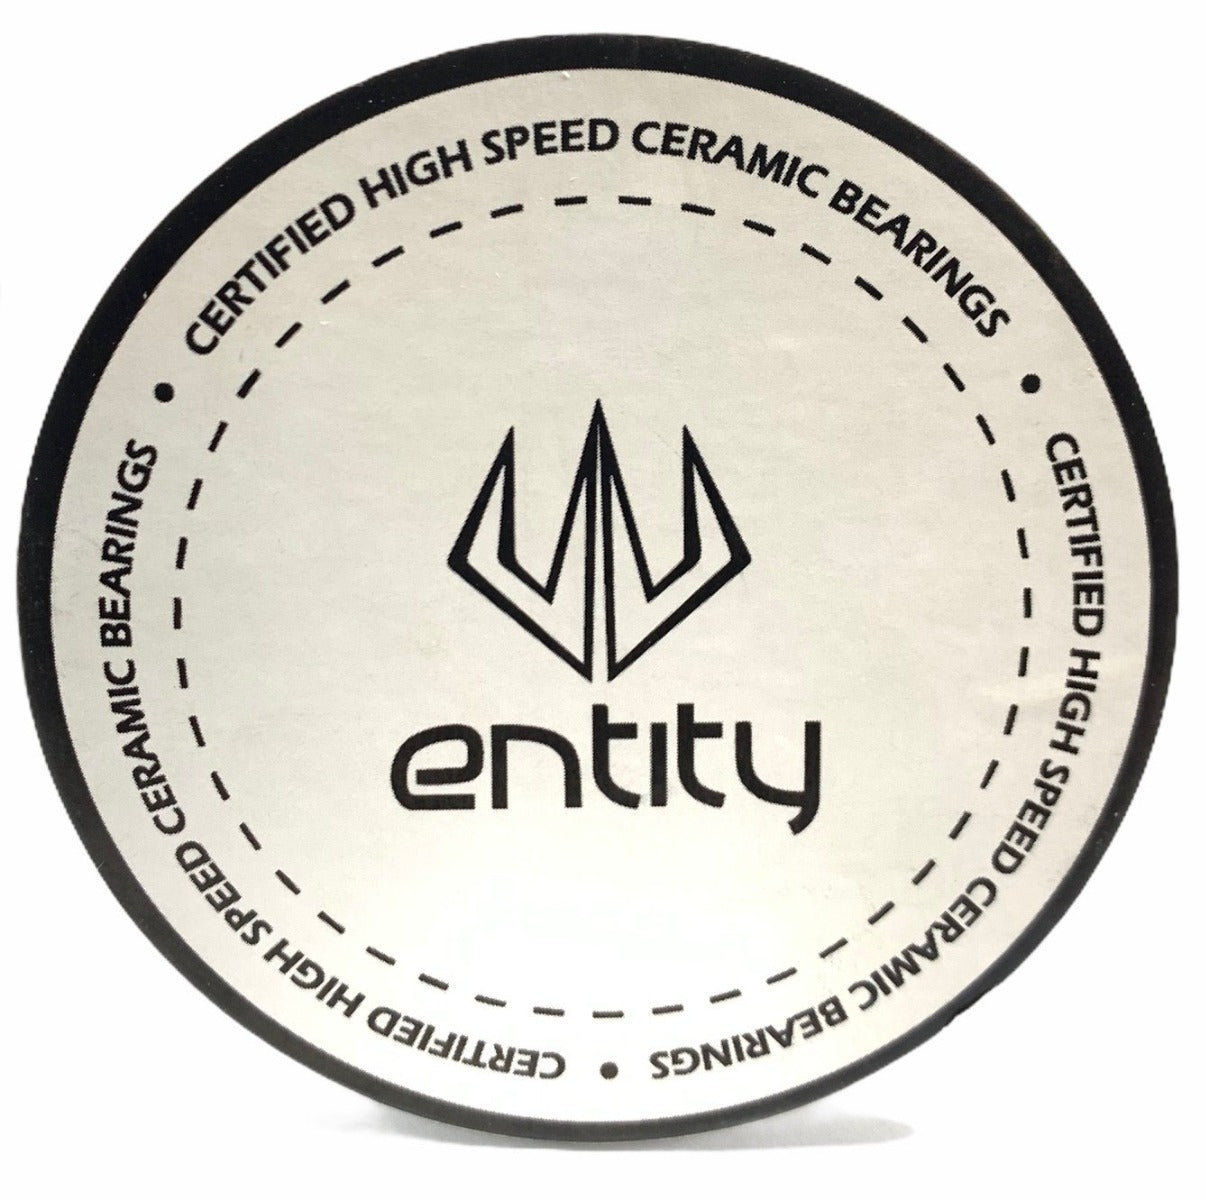 Entity Ceramic Scooter Bearings - 4 Pack - Tin